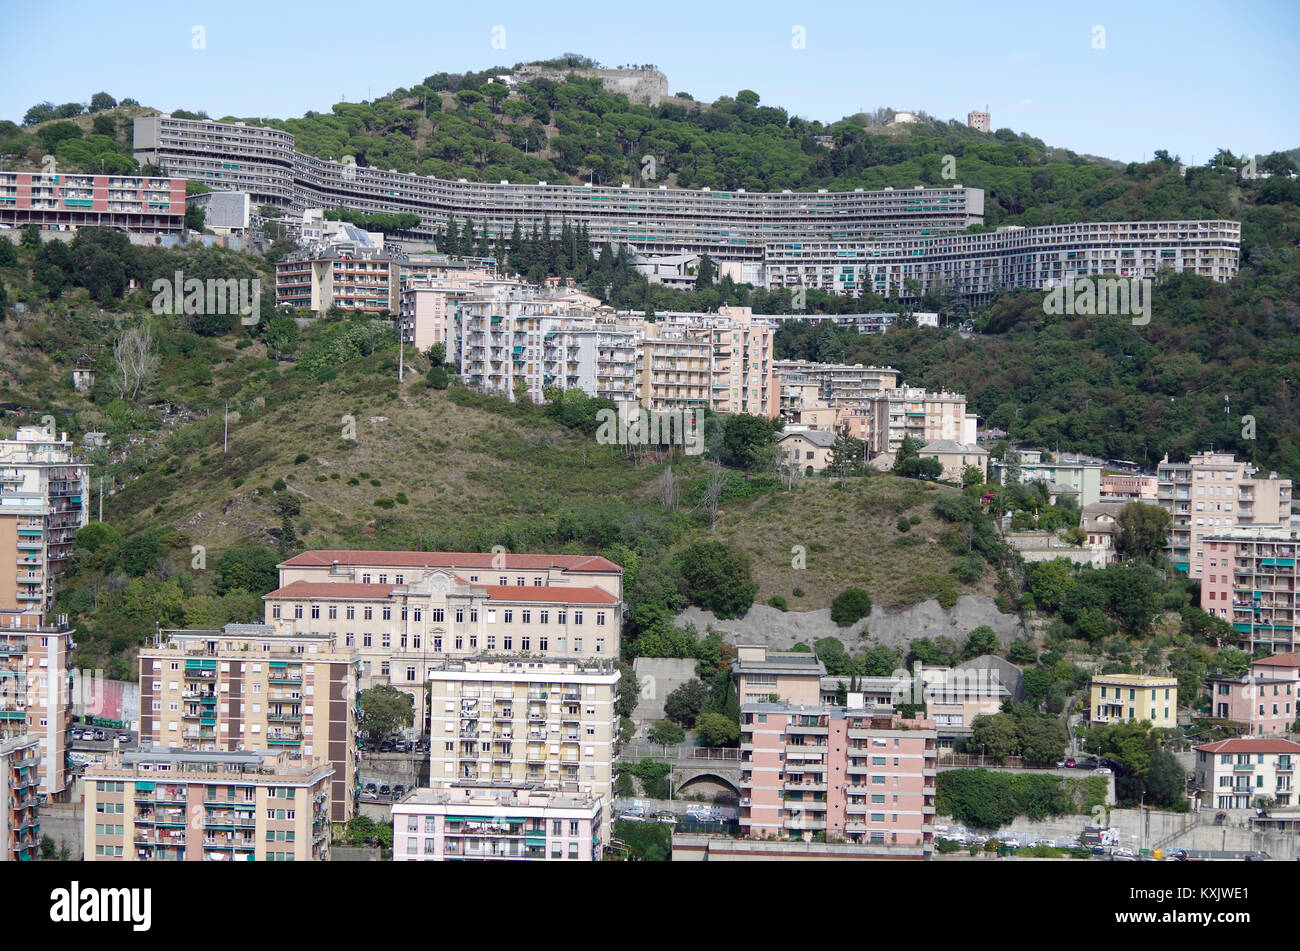 At the top of the images is Biscione, a huge social housing development on the edge of Genoa, viewed from Mura di San Bartolomeo Stock Photo